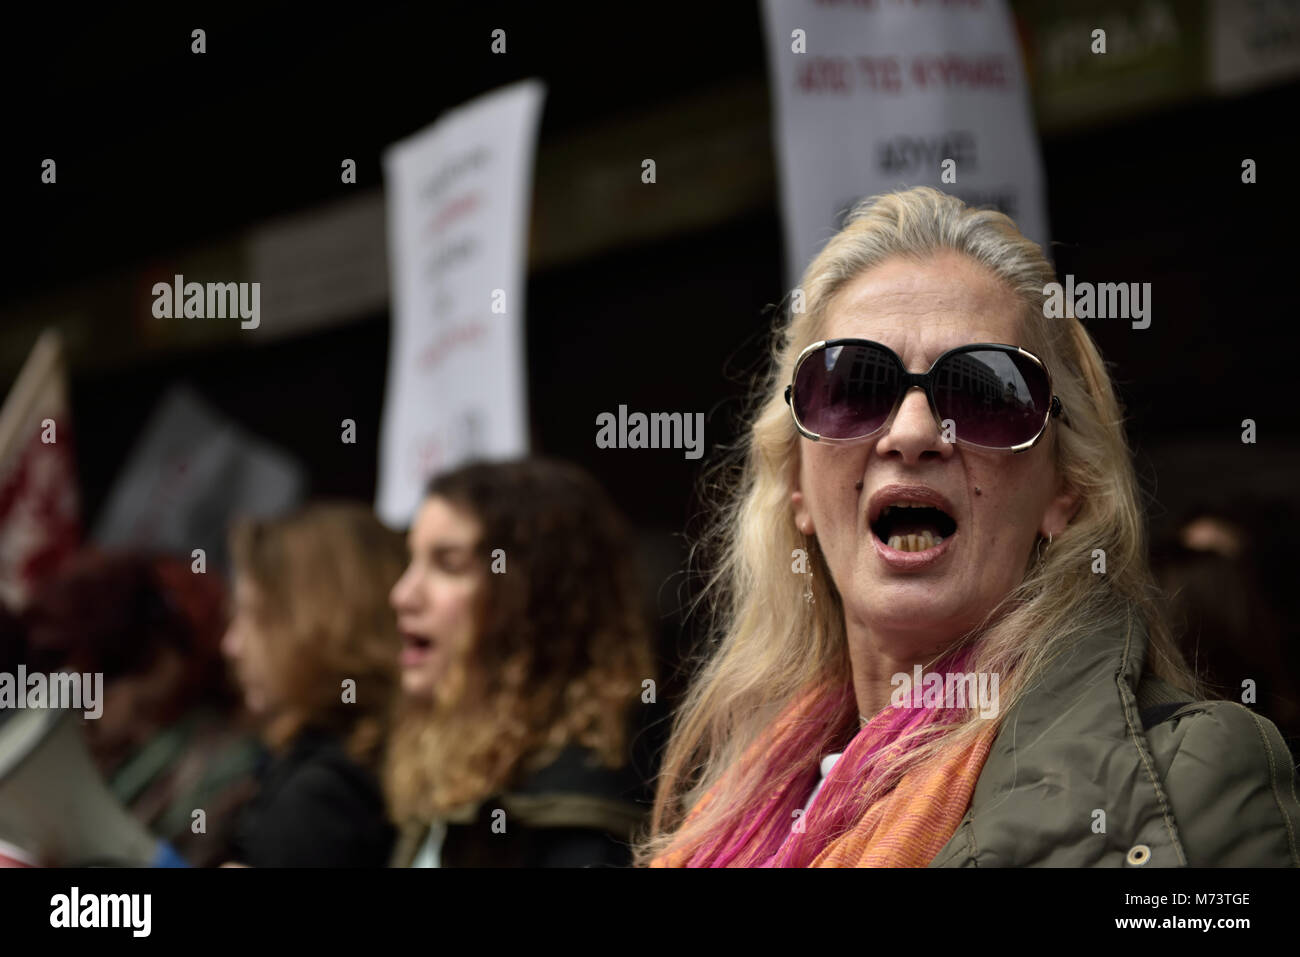 Athens, Greece, 8th March, 2018. A woman chants slogans standing in front of the Ministry of Labor to honor the International Women's Day  in Athens, Greece. Credit: Nicolas Koutsokostas/Alamy Live News. Stock Photo